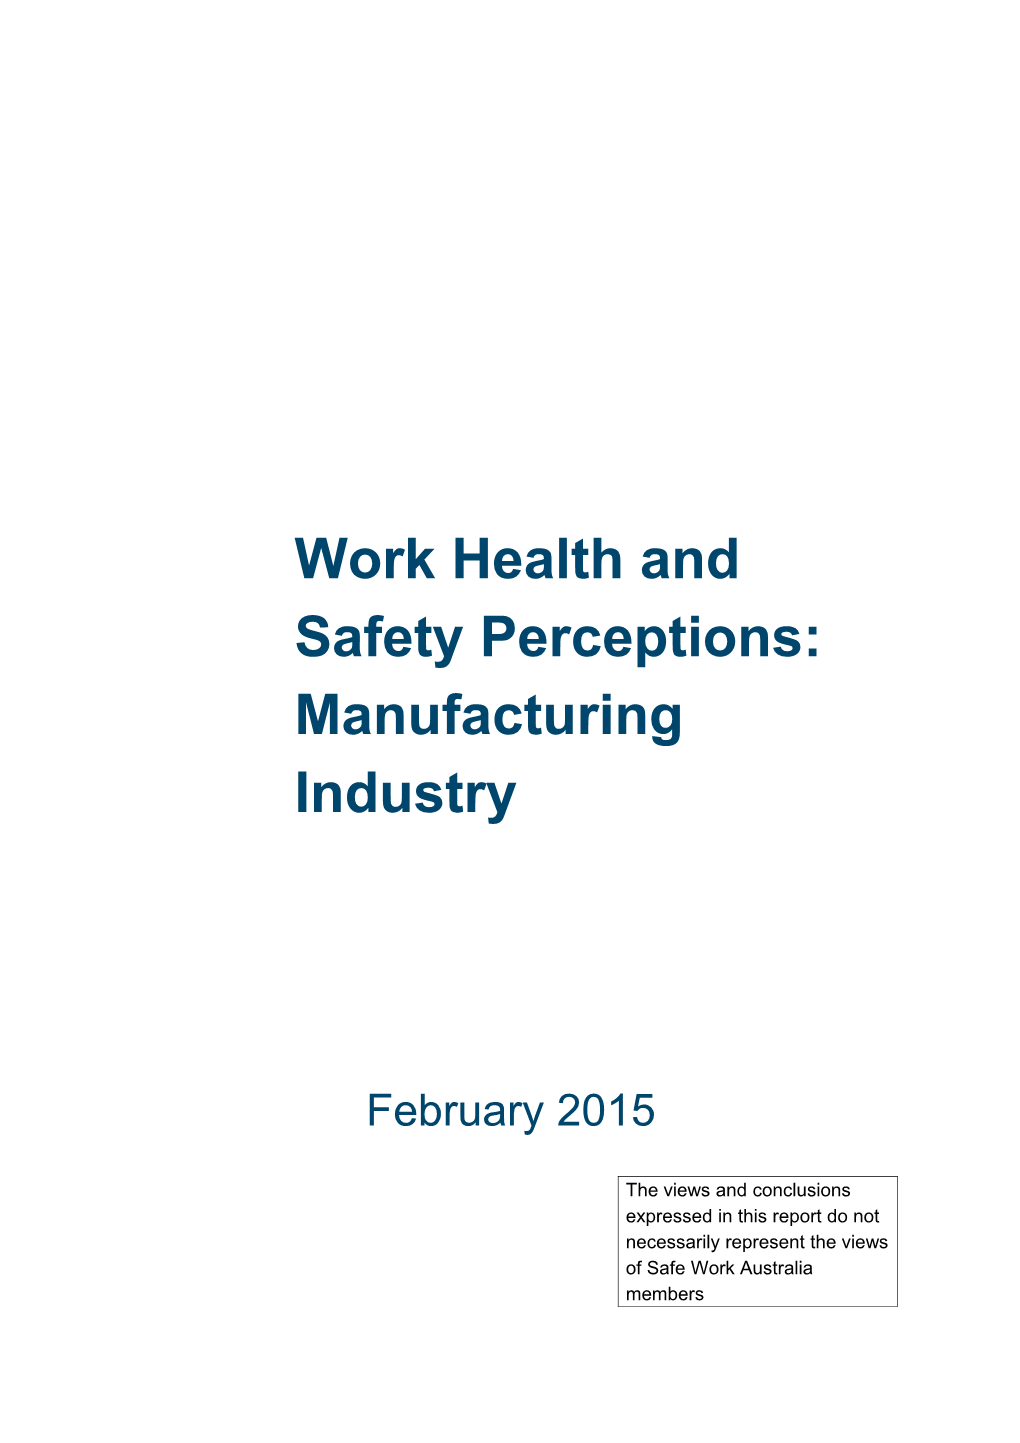 Work Health and Safety Perceptions: Manfacturing Industry